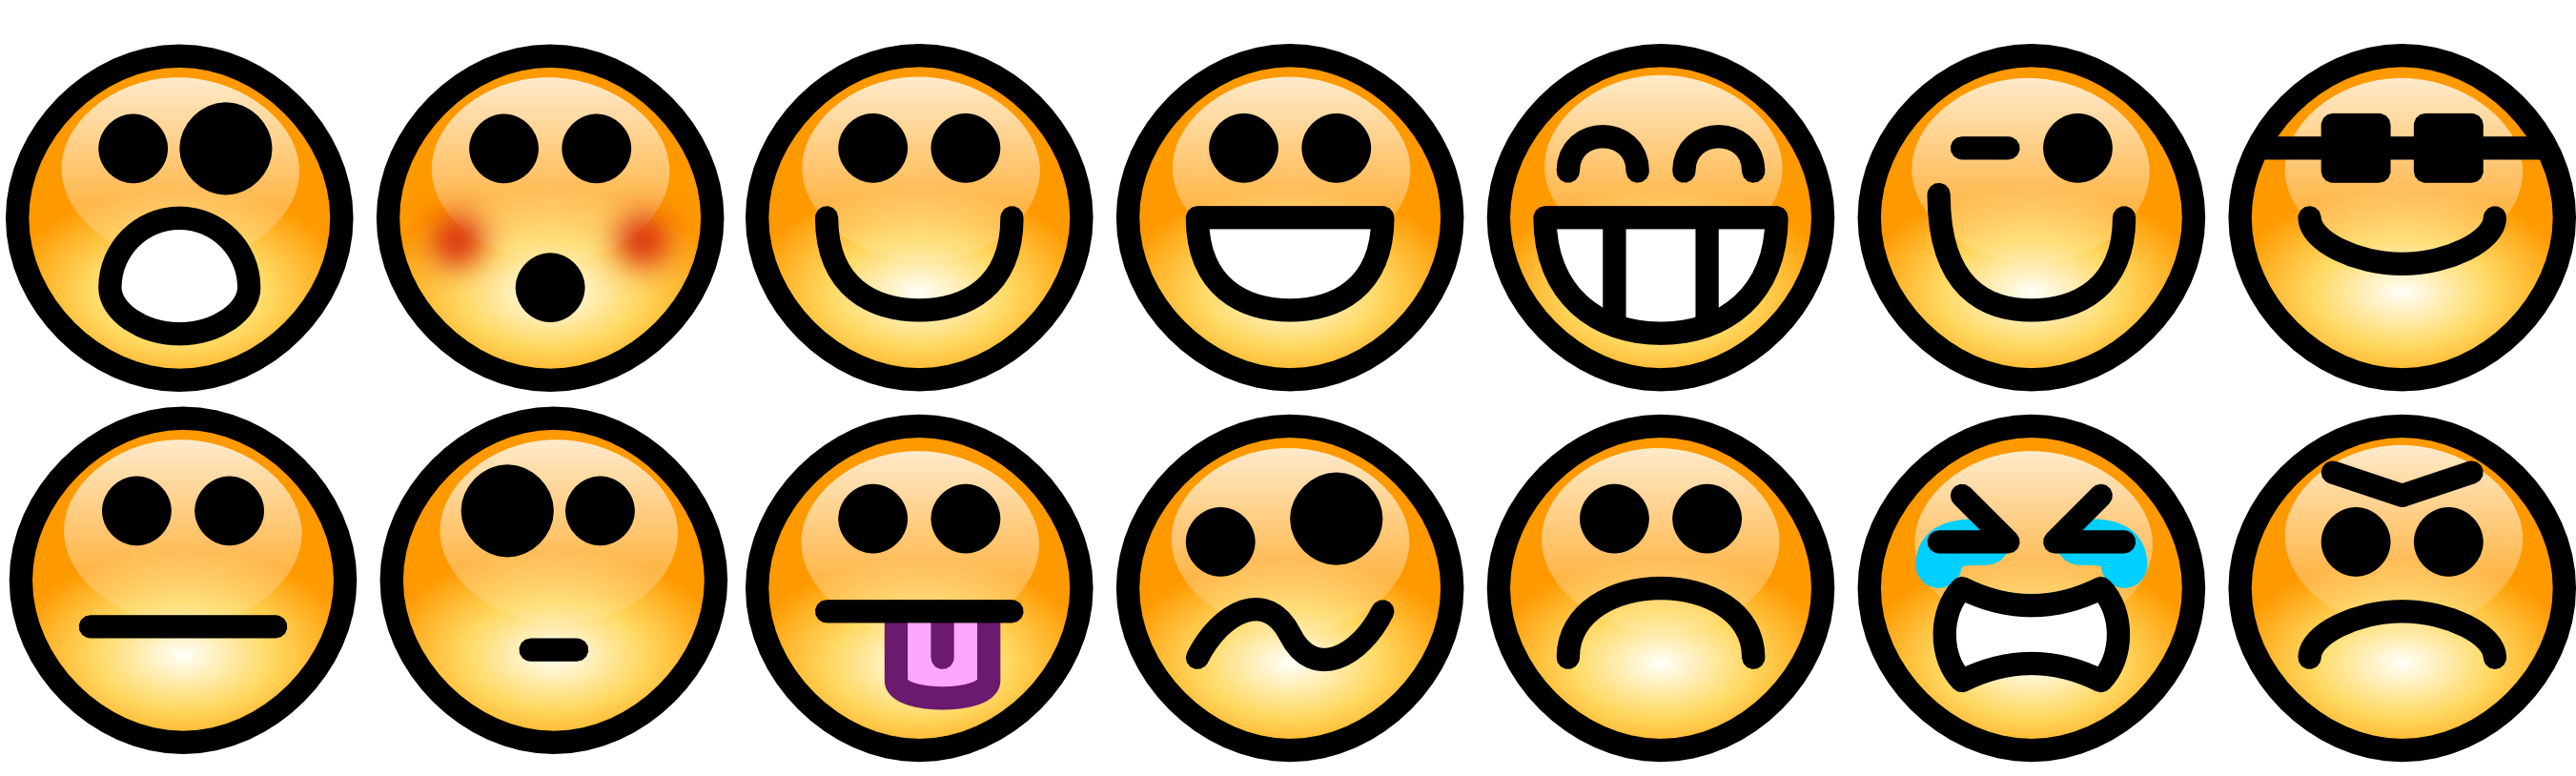 emotions clipart important